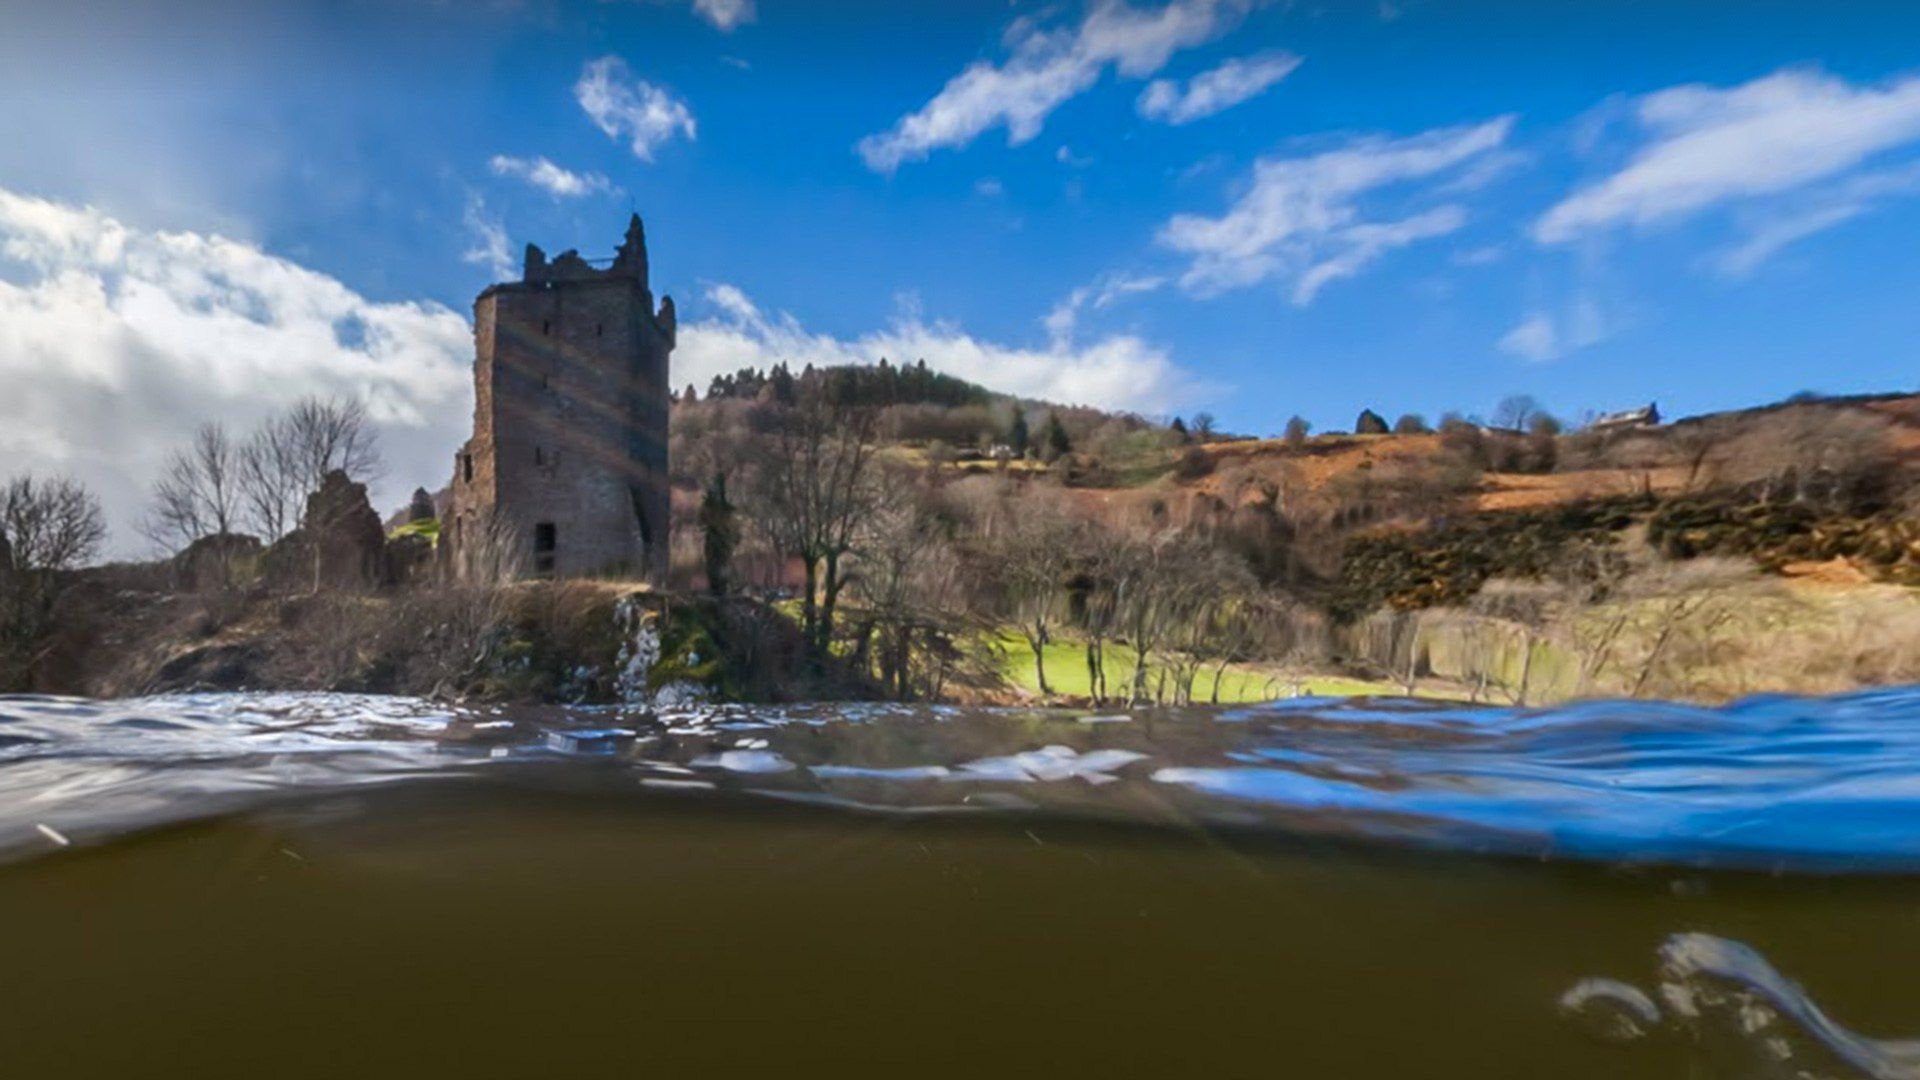 Google maps enlisted in search for loch ness monster